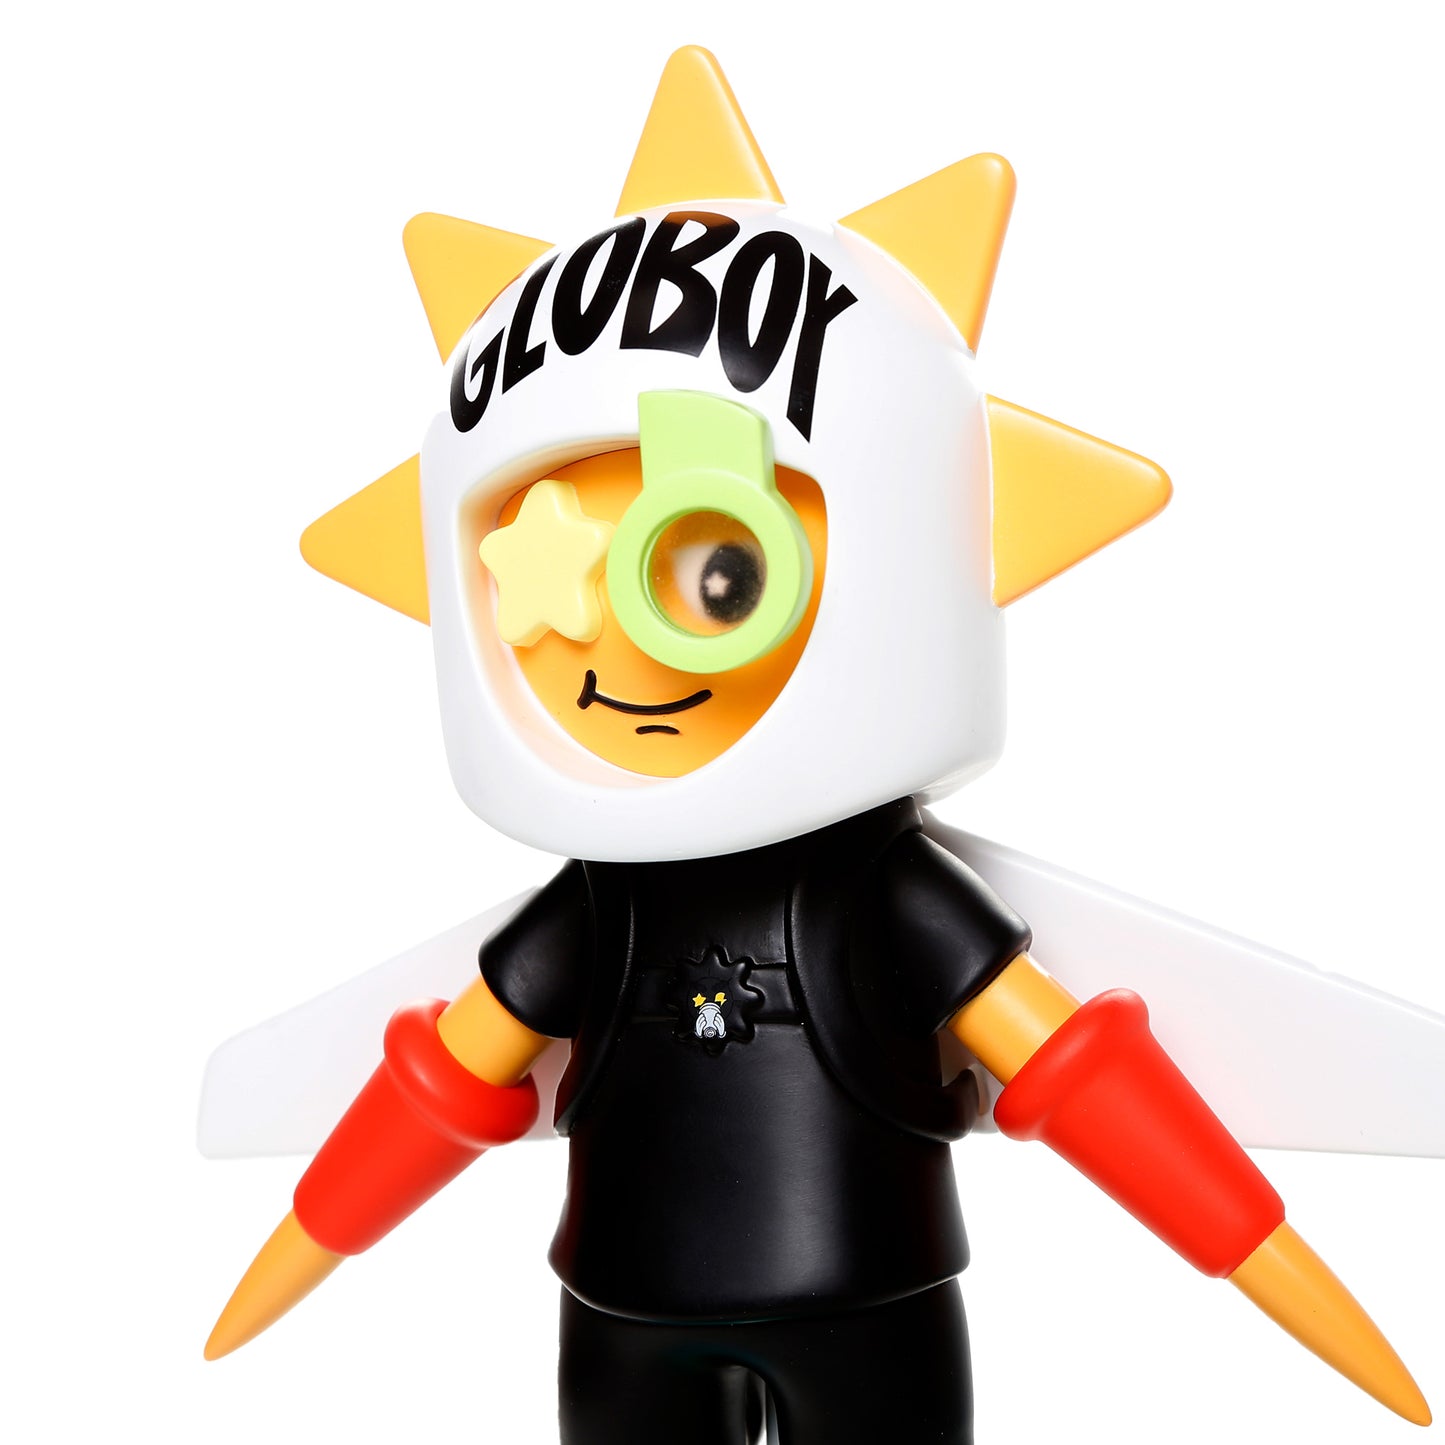 GloBoy The Toy